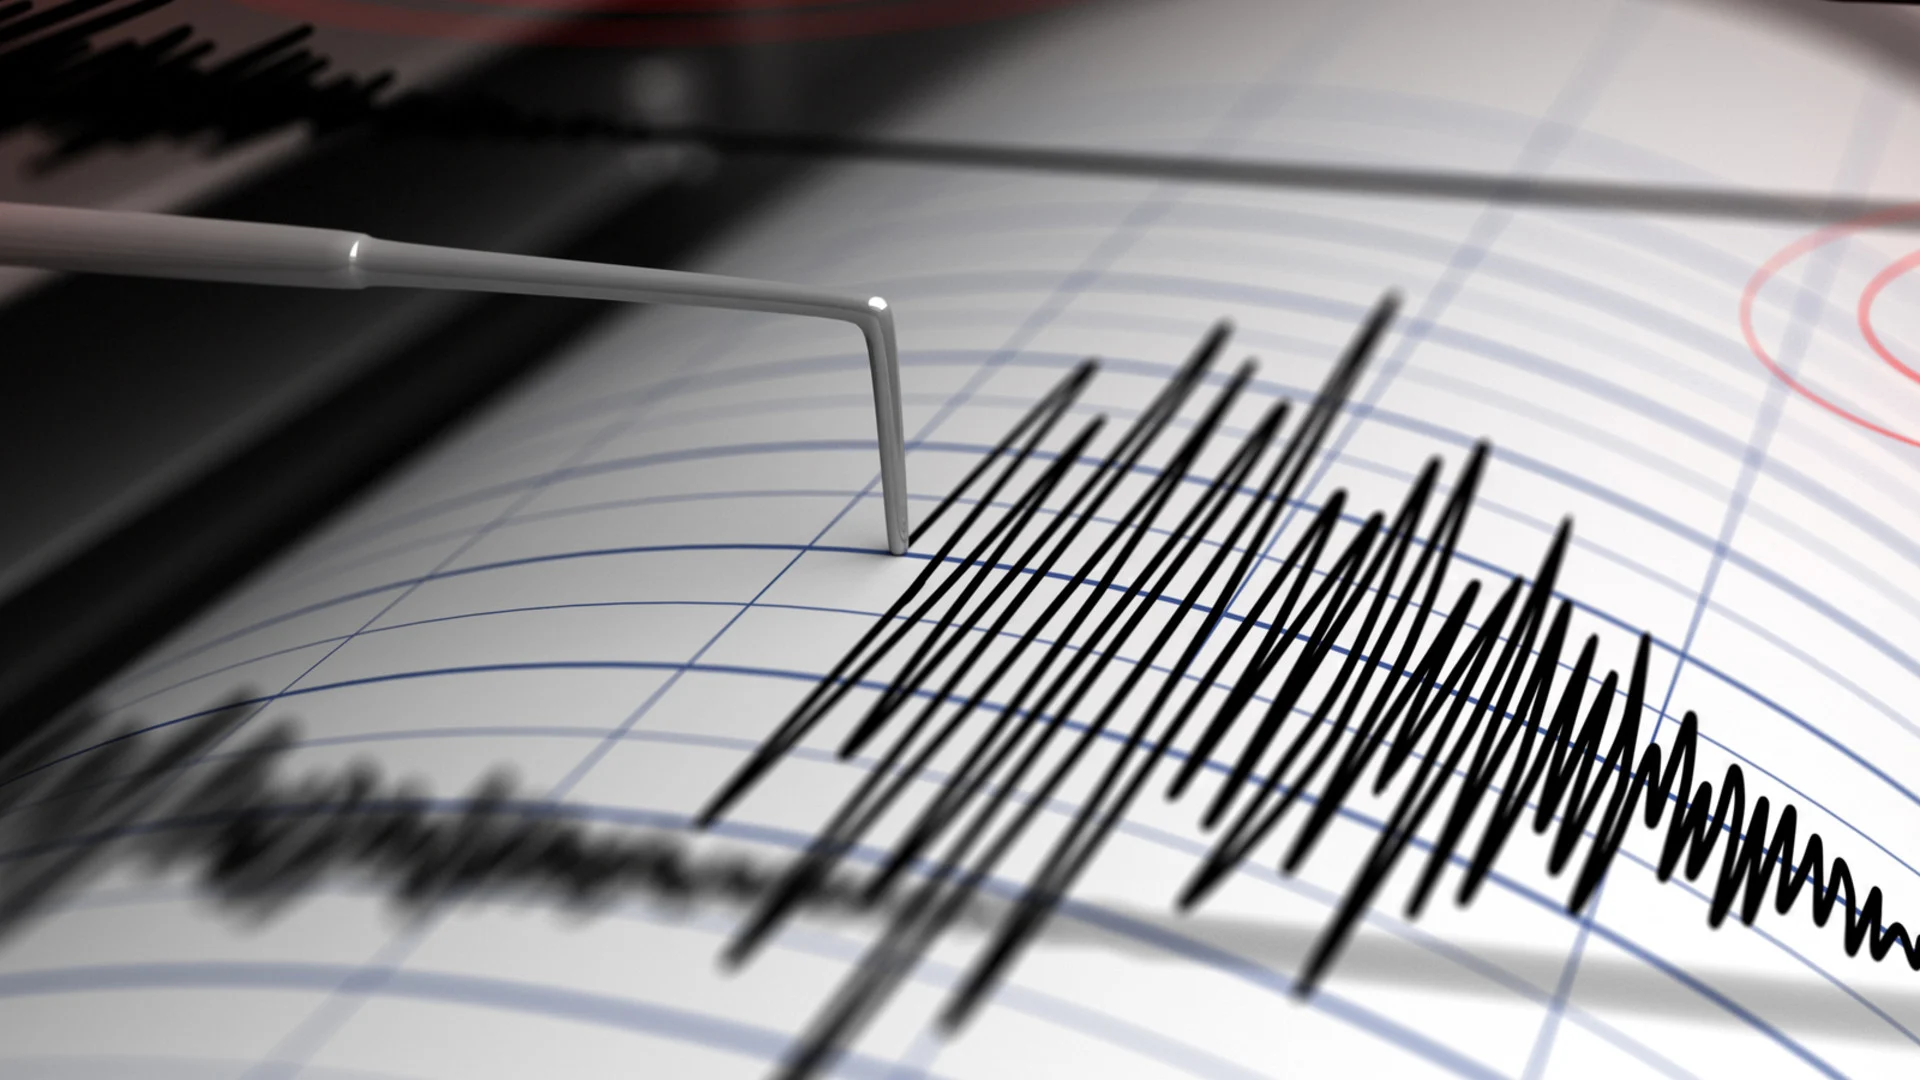 A new earthquake warning system will prepare Canada for dangerous shaking